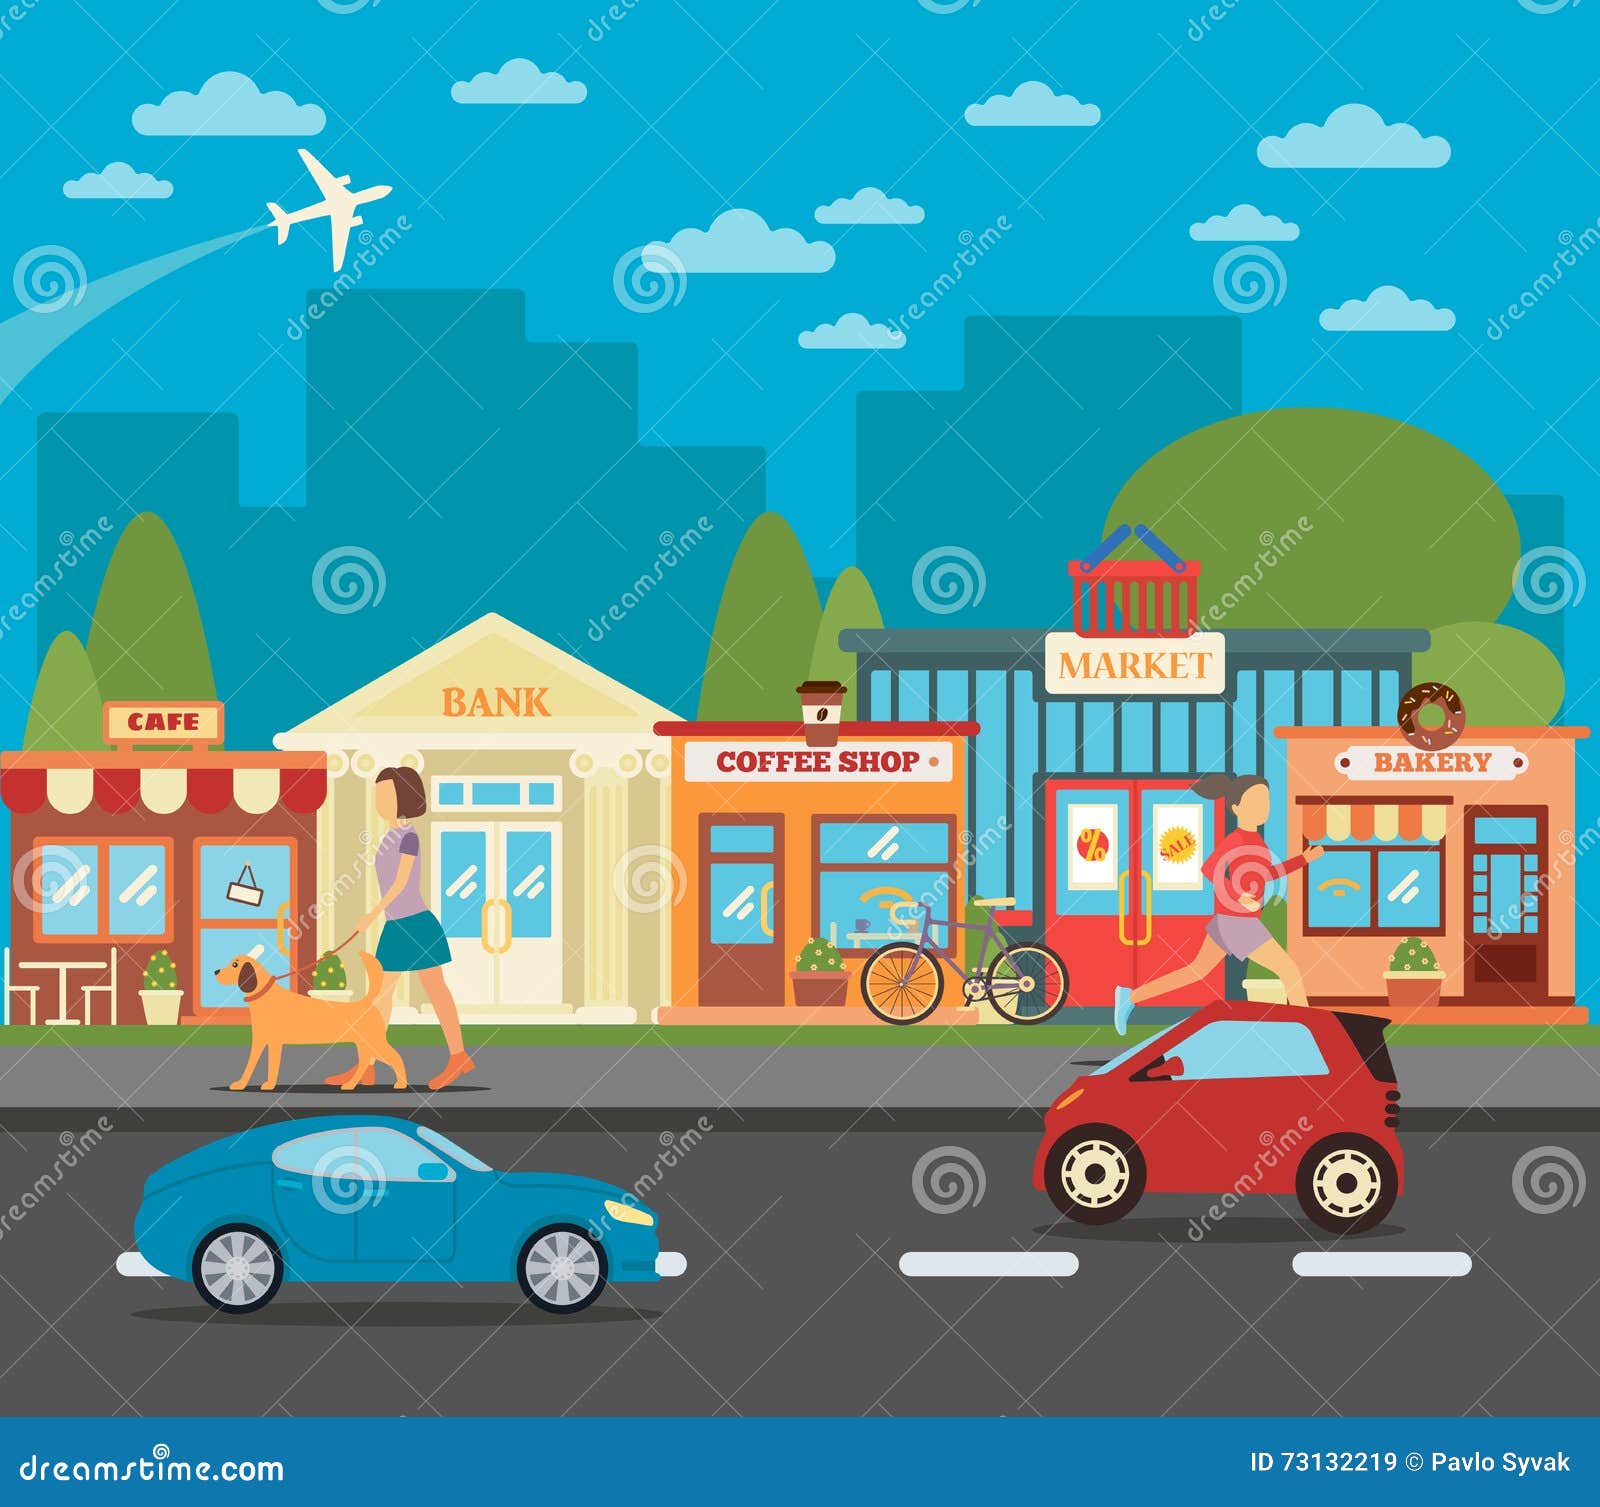 https://thumbs.dreamstime.com/z/small-town-urban-cityscape-shops-active-people-cars-vector-illustration-73132219.jpg